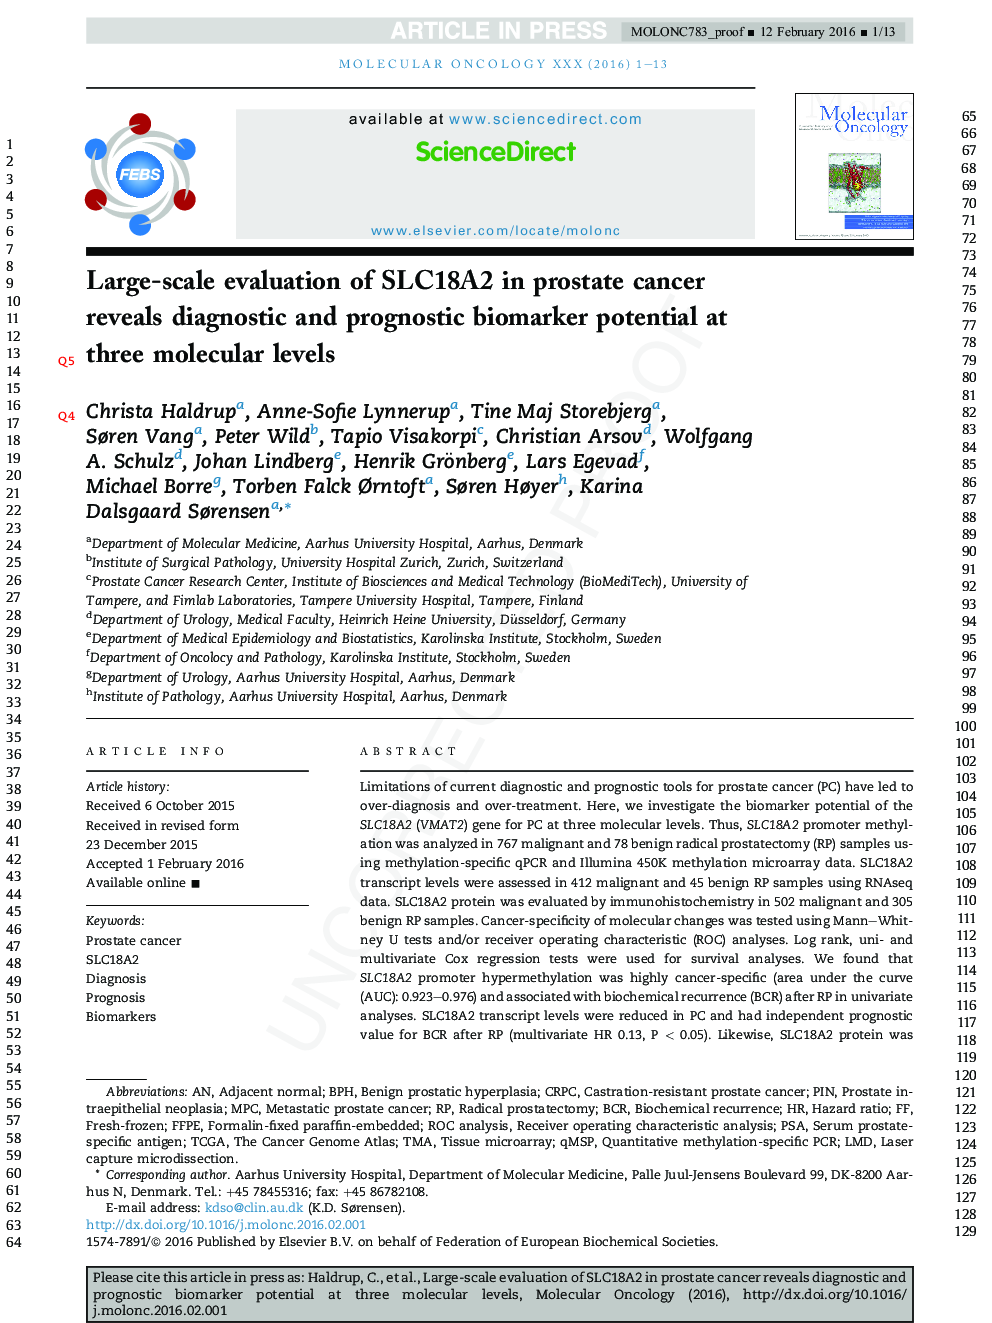 Large-scale evaluation of SLC18A2 in prostate cancer reveals diagnostic and prognostic biomarker potential at three molecular levels